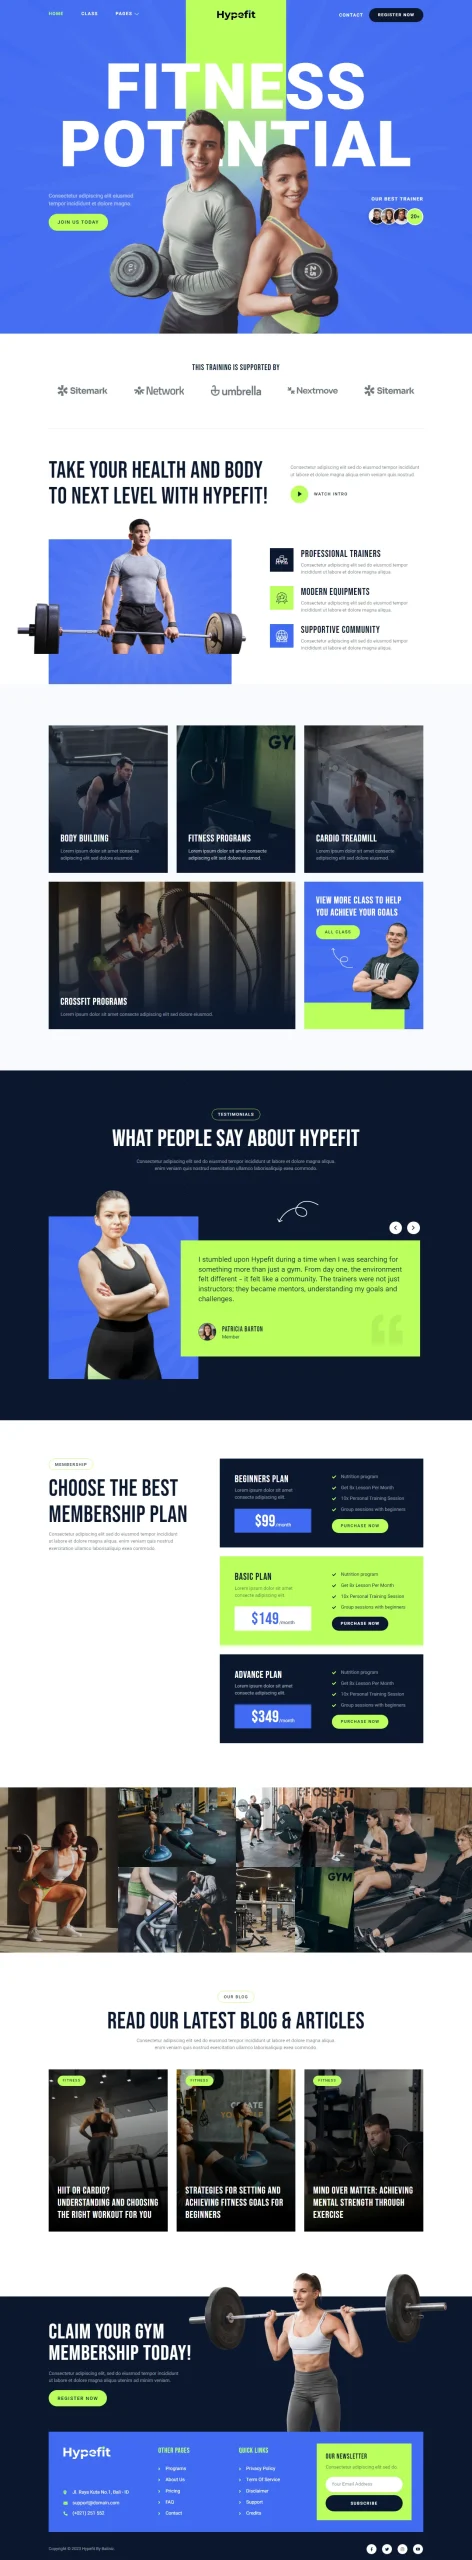 Hypefit personal trainer fitness